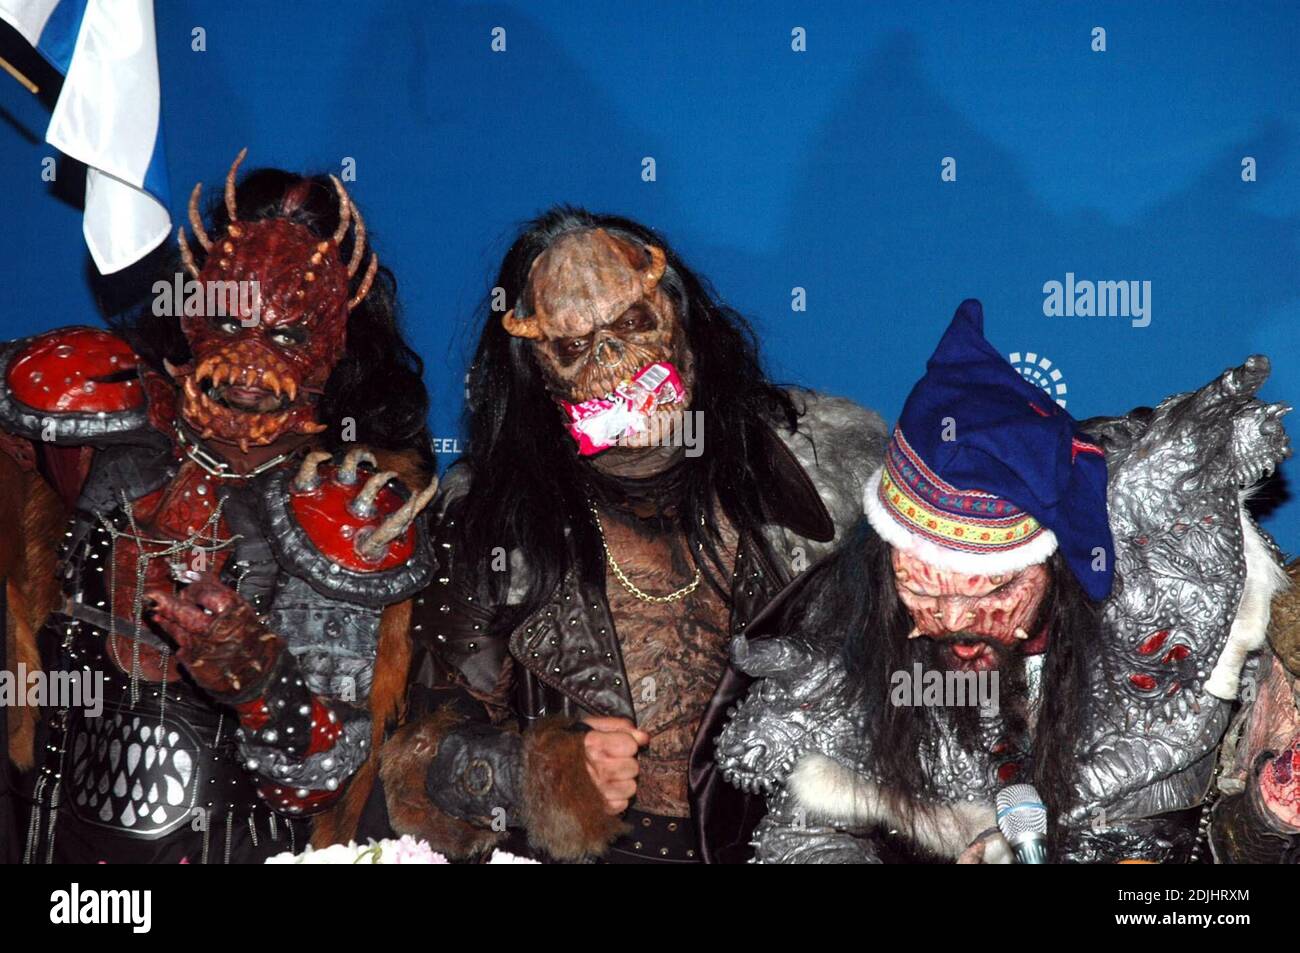 Eurovision winners Finland entry Lordi at the 2006 Eurovision Song Contest in Athens, Greece, 5/19/06 Stock Photo